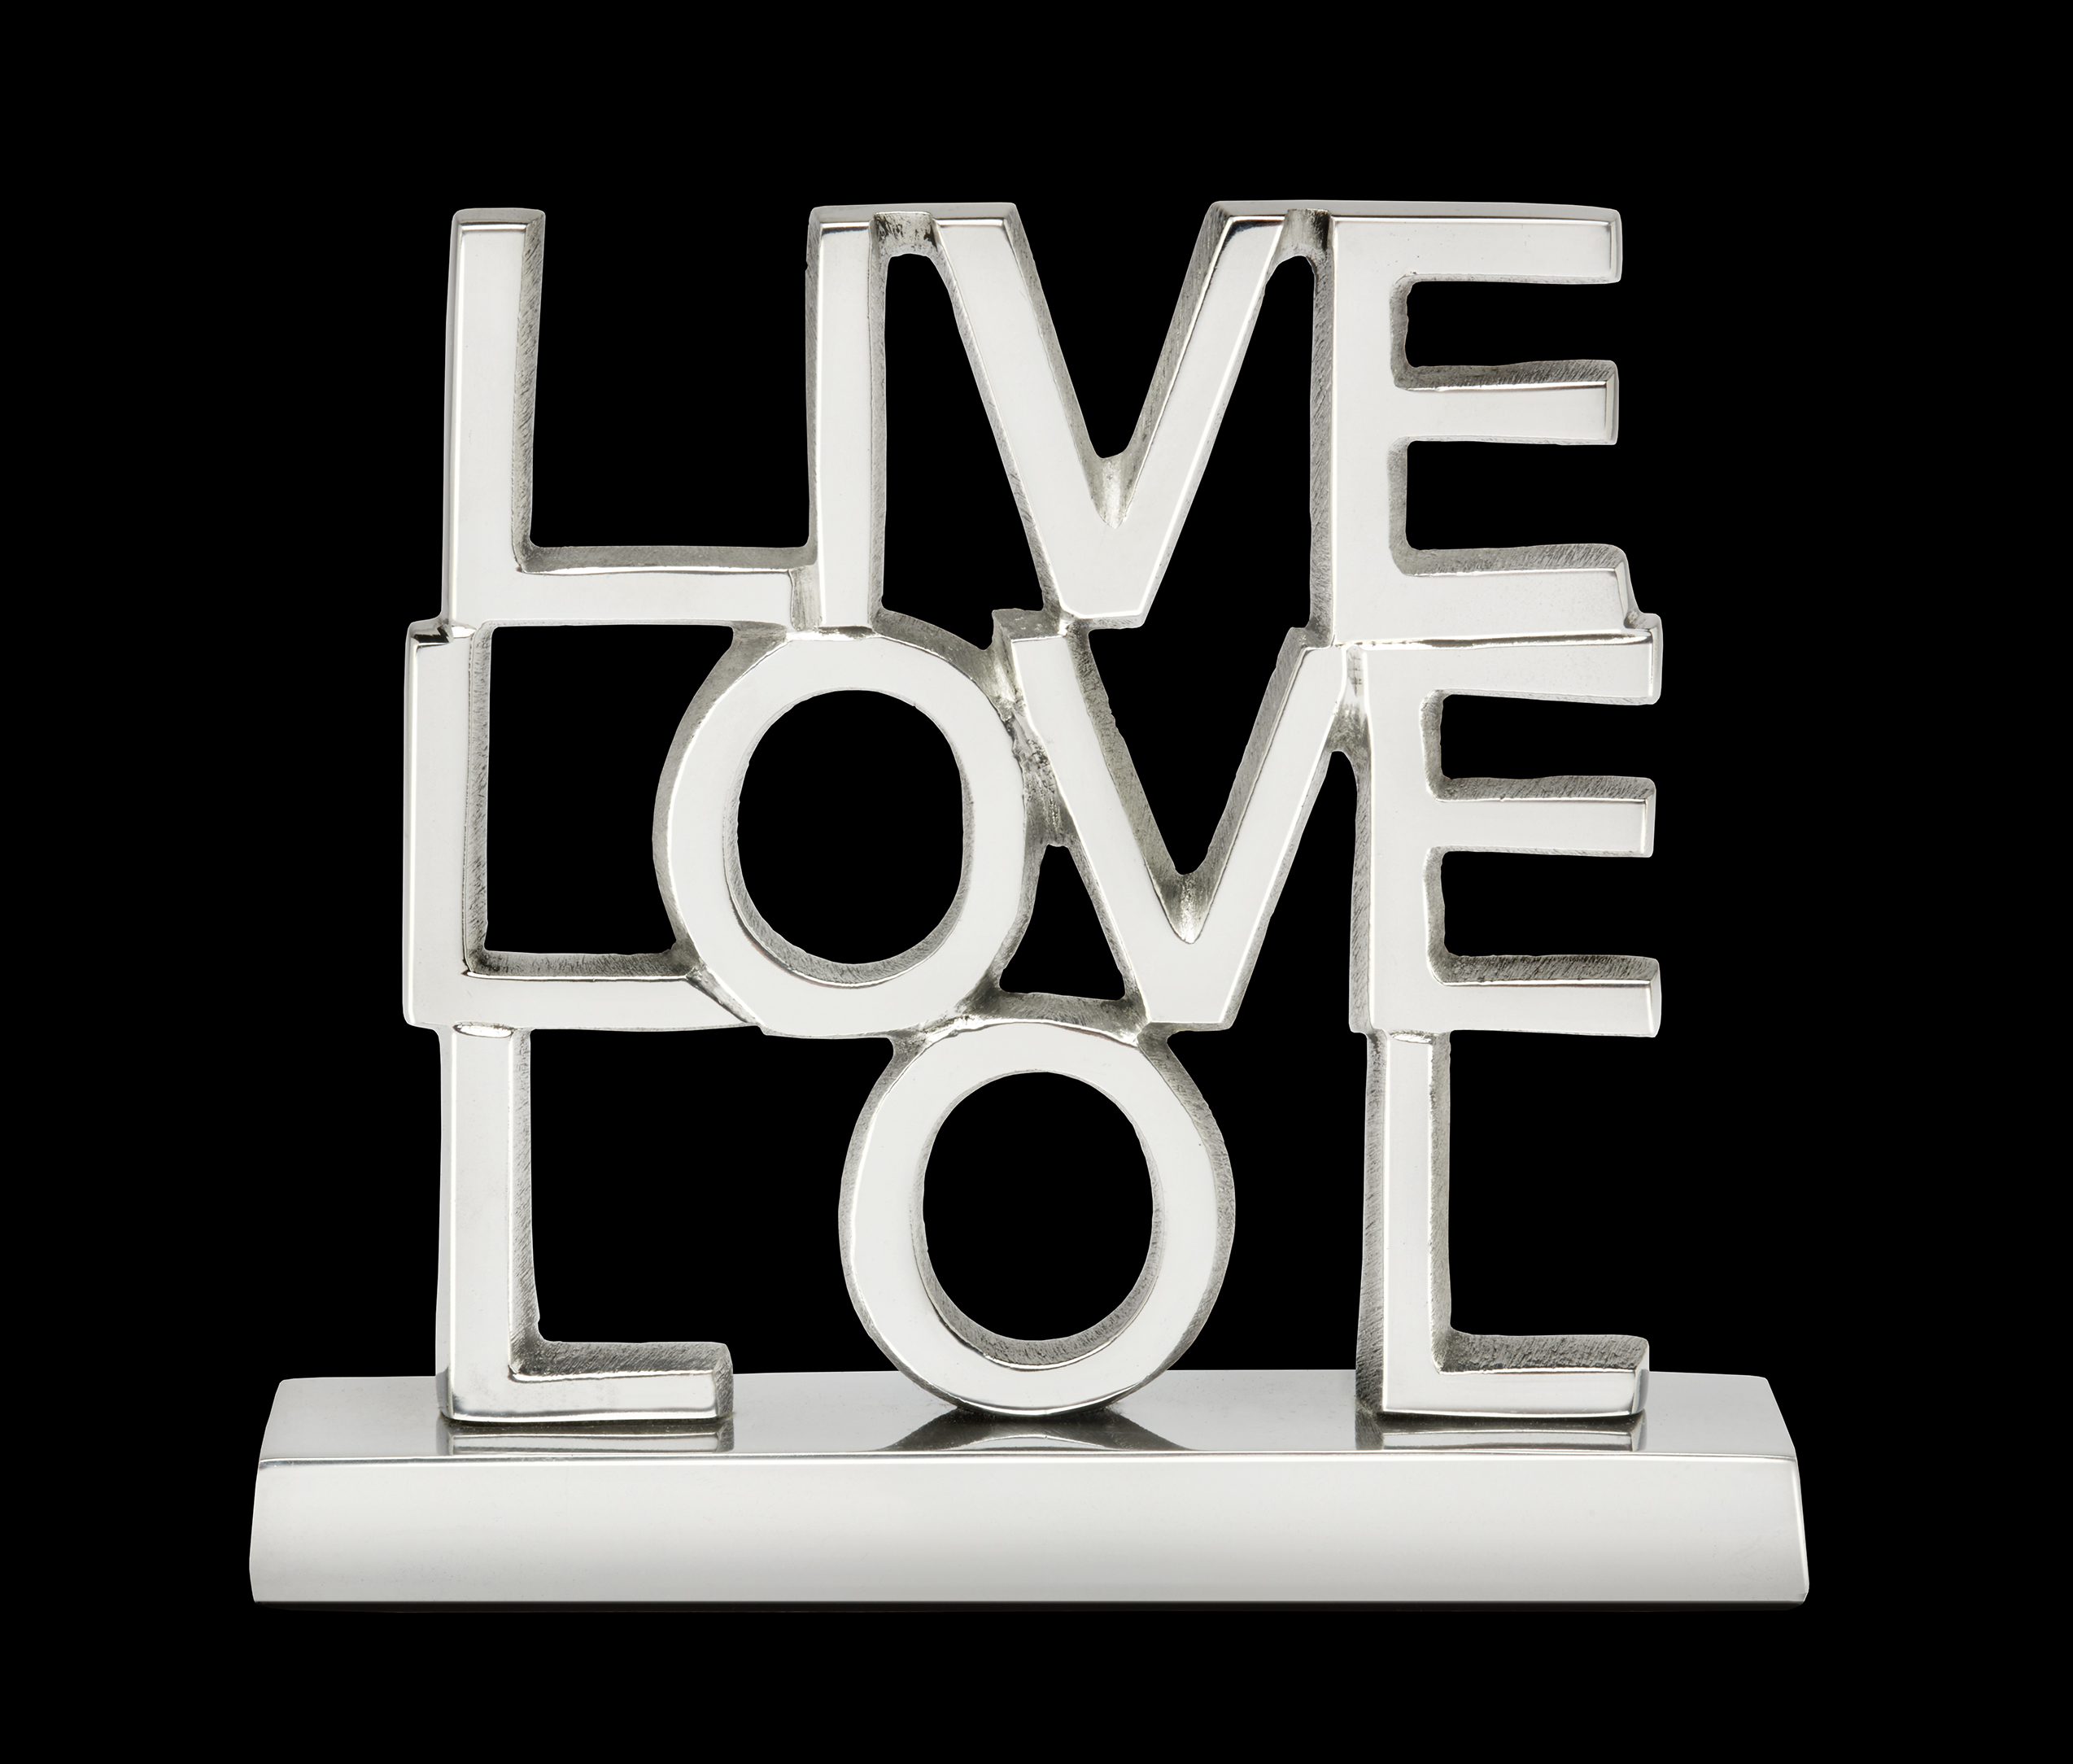 LOL - Love of Life by